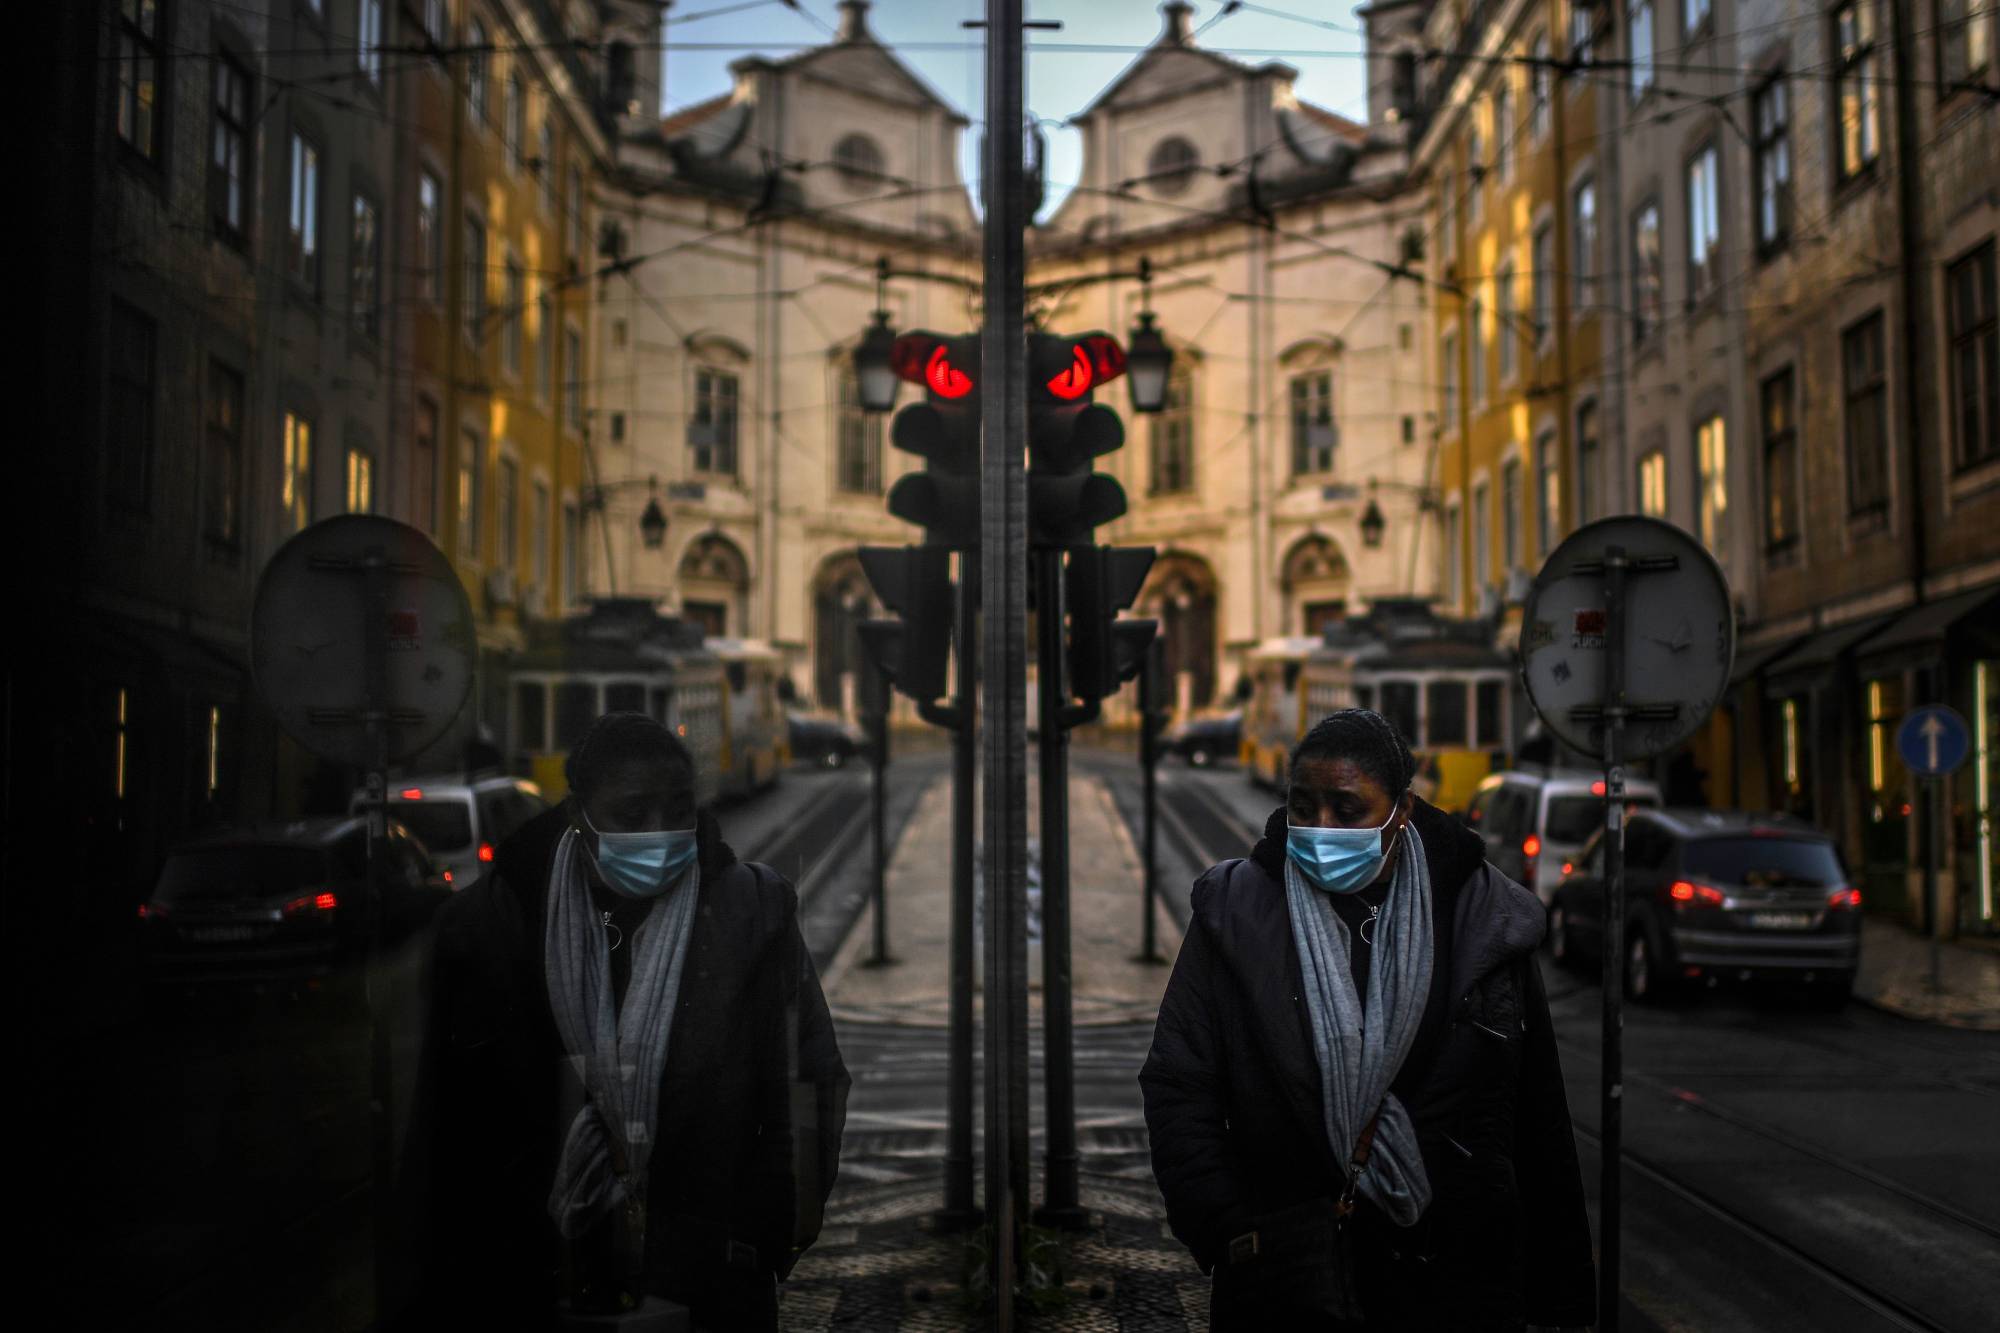 A woman is reflected in a shop window in Lisbon on Friday as Portugal entered a fresh lockdown over a surge in coronavirus cases. | AFP-JIJI